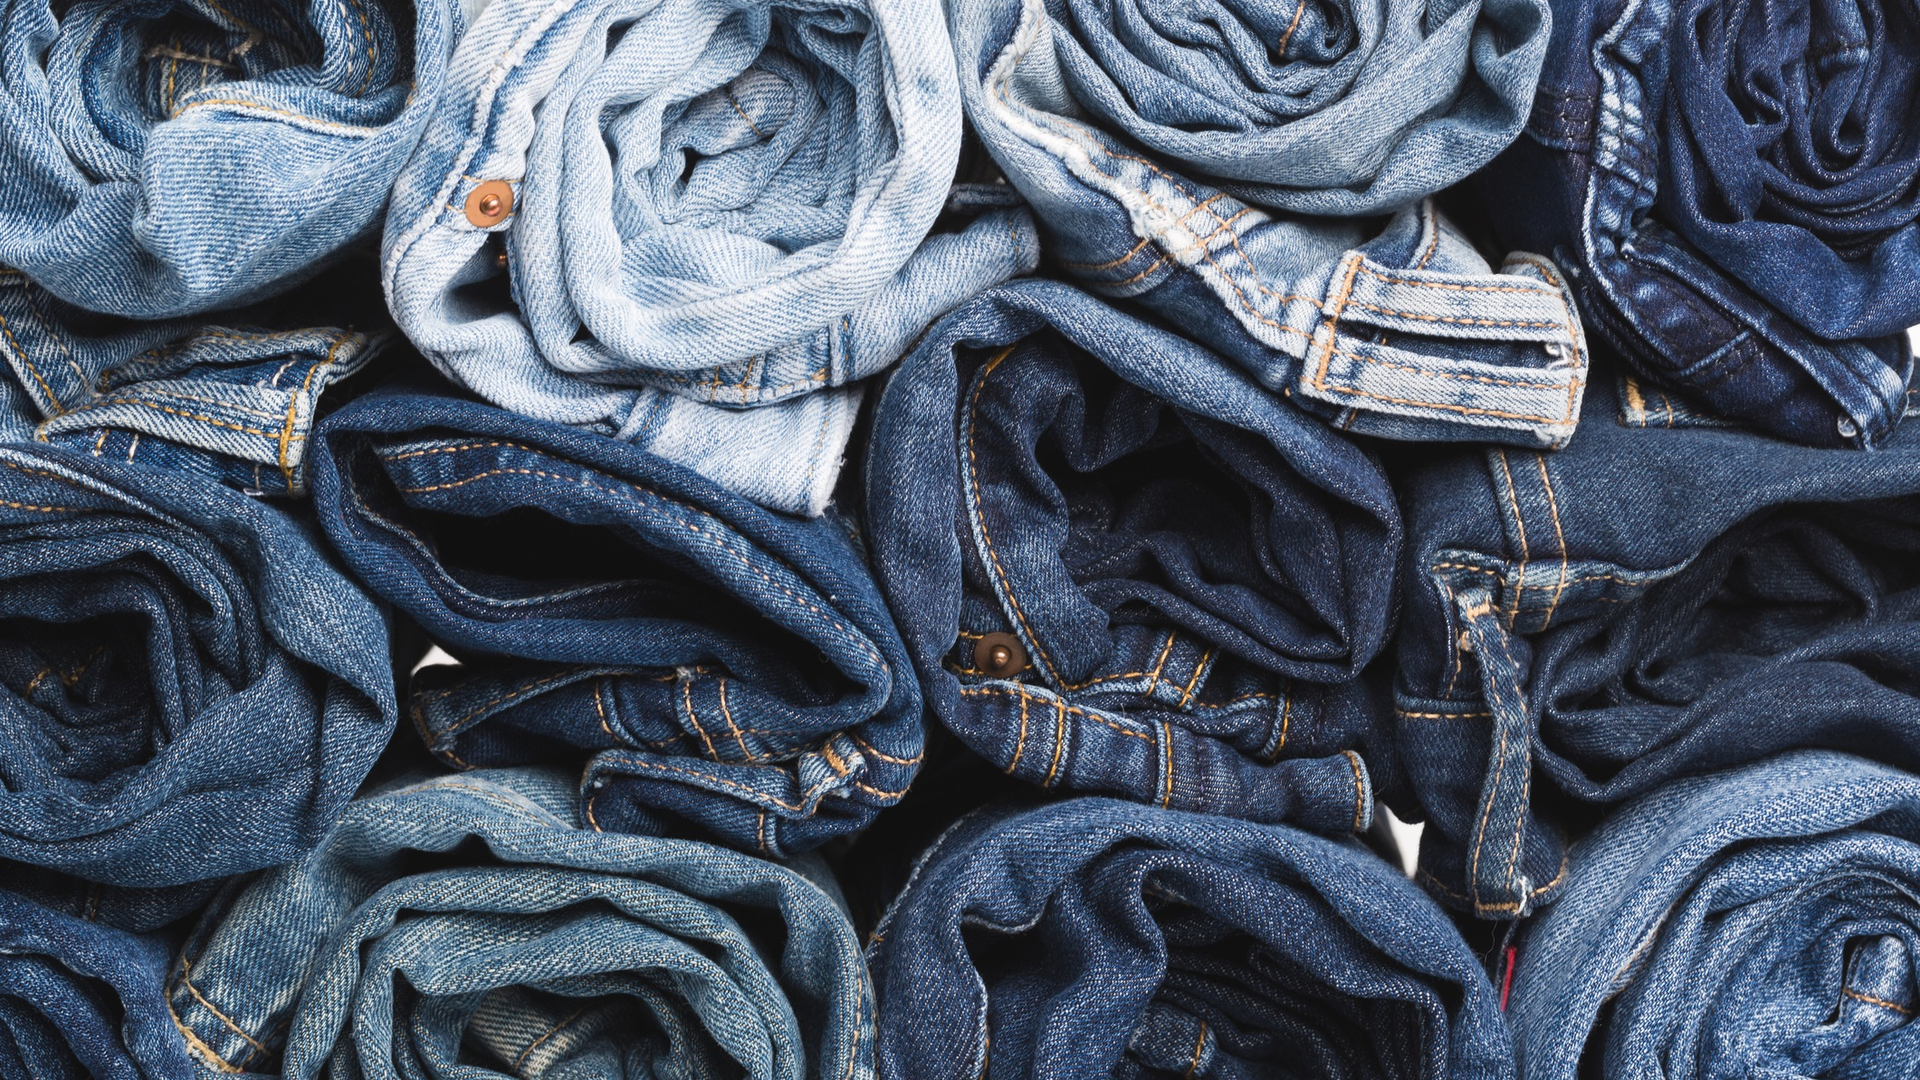 jeans manufacturing business